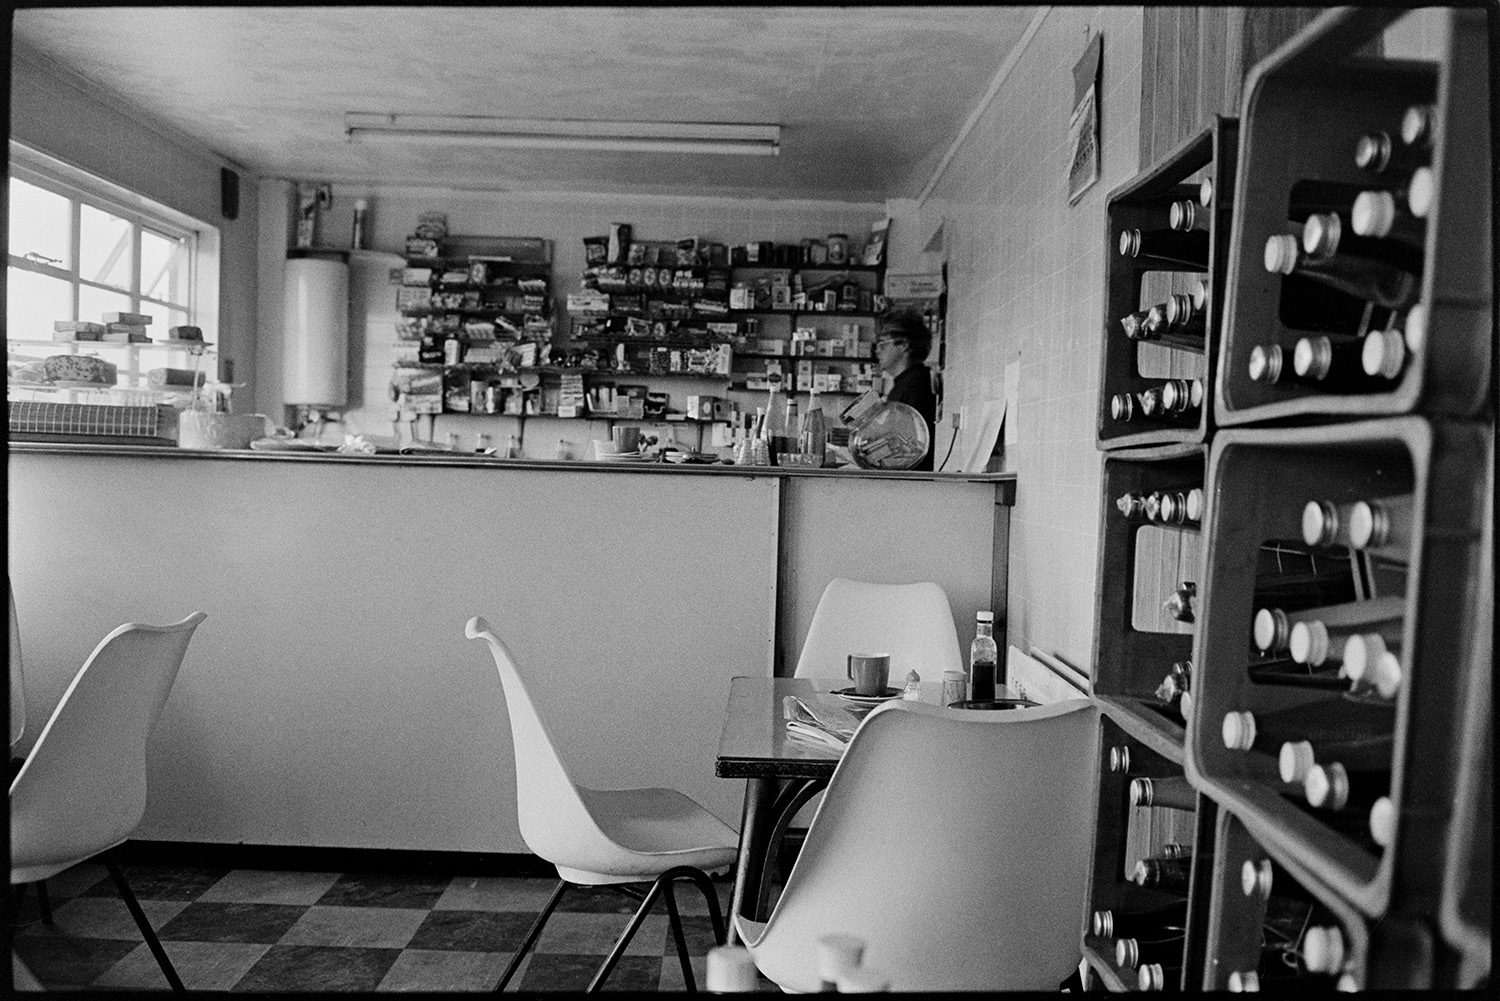 Interior of cafe at garage, sweets and soft drinks on shelf. 
[A woman stood behind the counter in a café at the Fishleigh Rock Garage in Umberleigh. Tables and chairs can be seen next to shelves with bottles.]